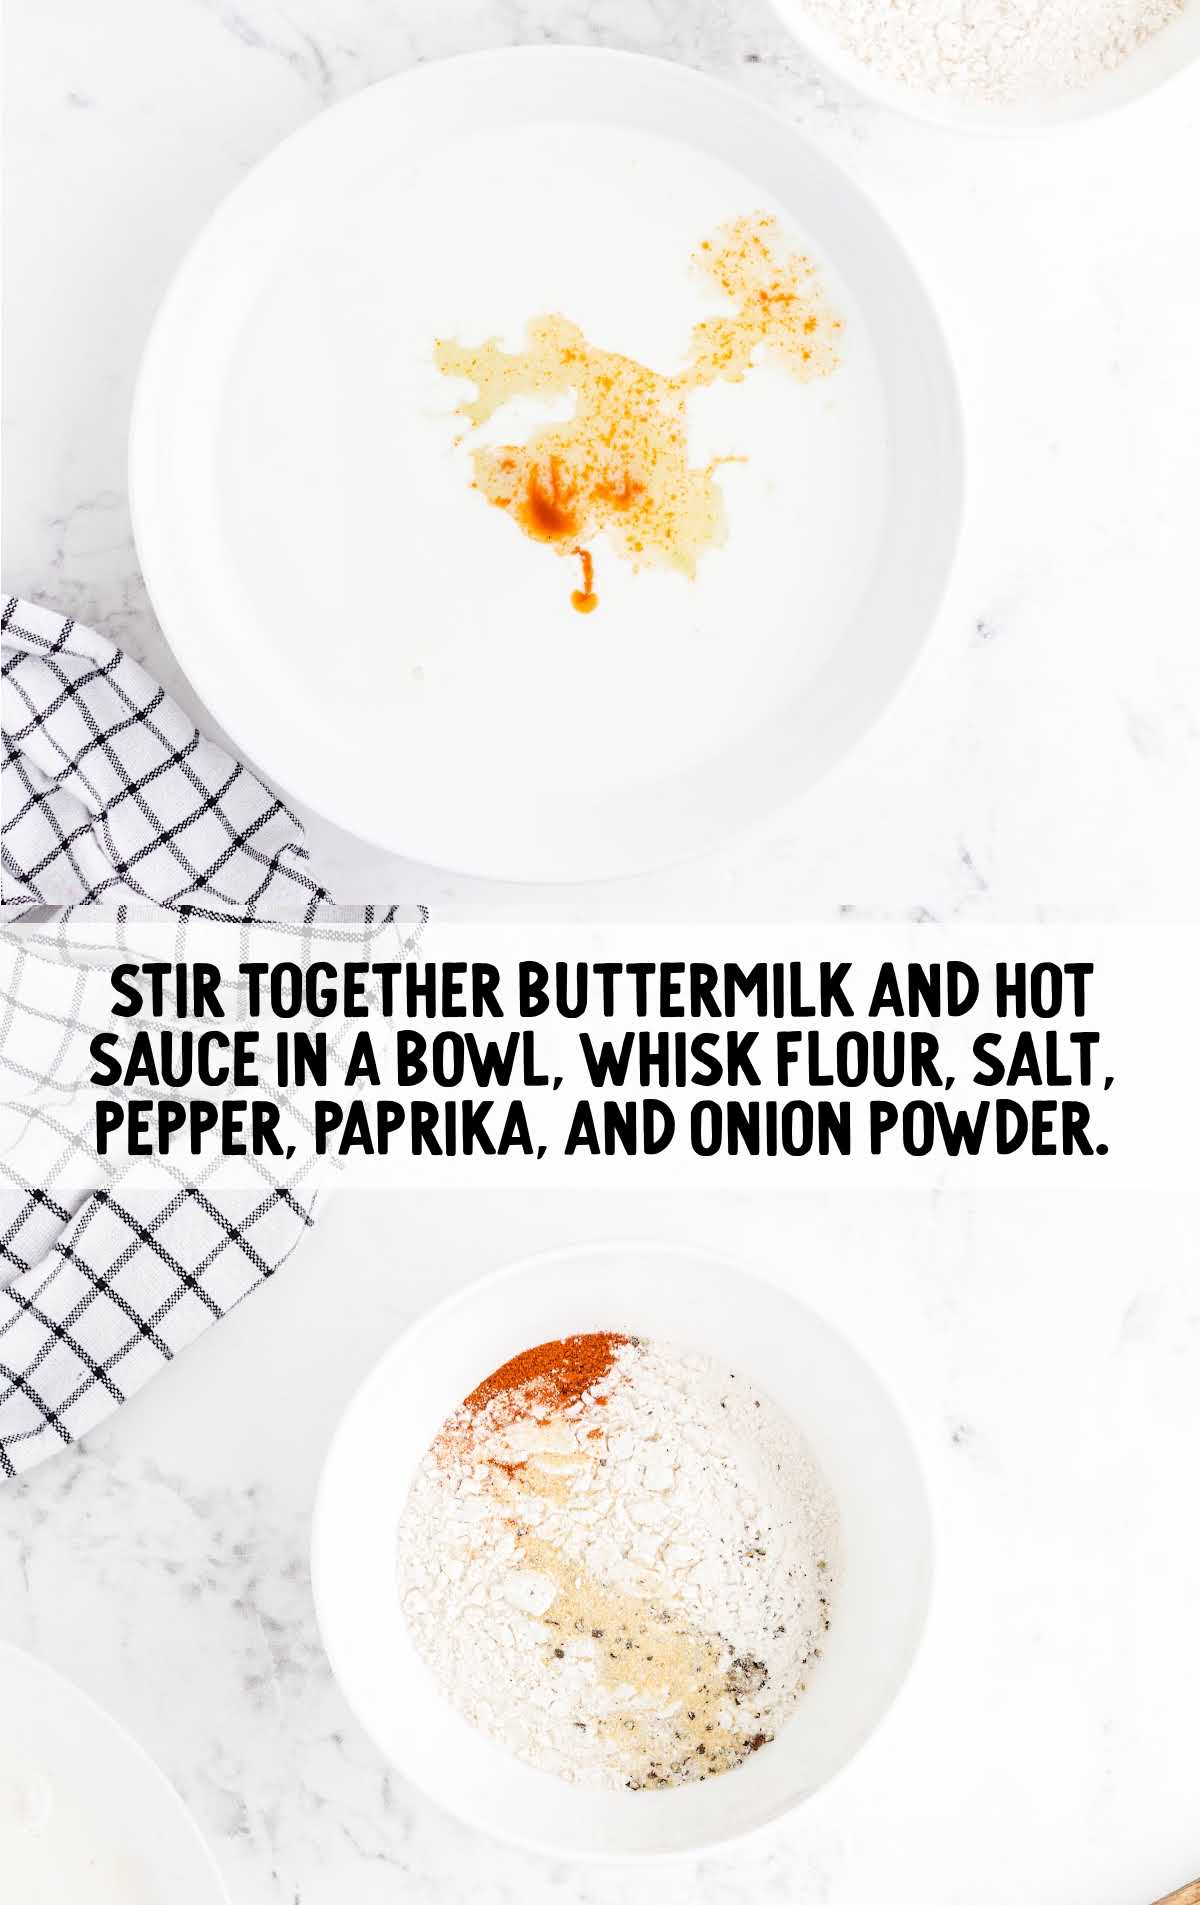 buttermilk and hot sauce stirred together and in a separate bowl whisk flour, salt, pepper, paprika, and onion powder